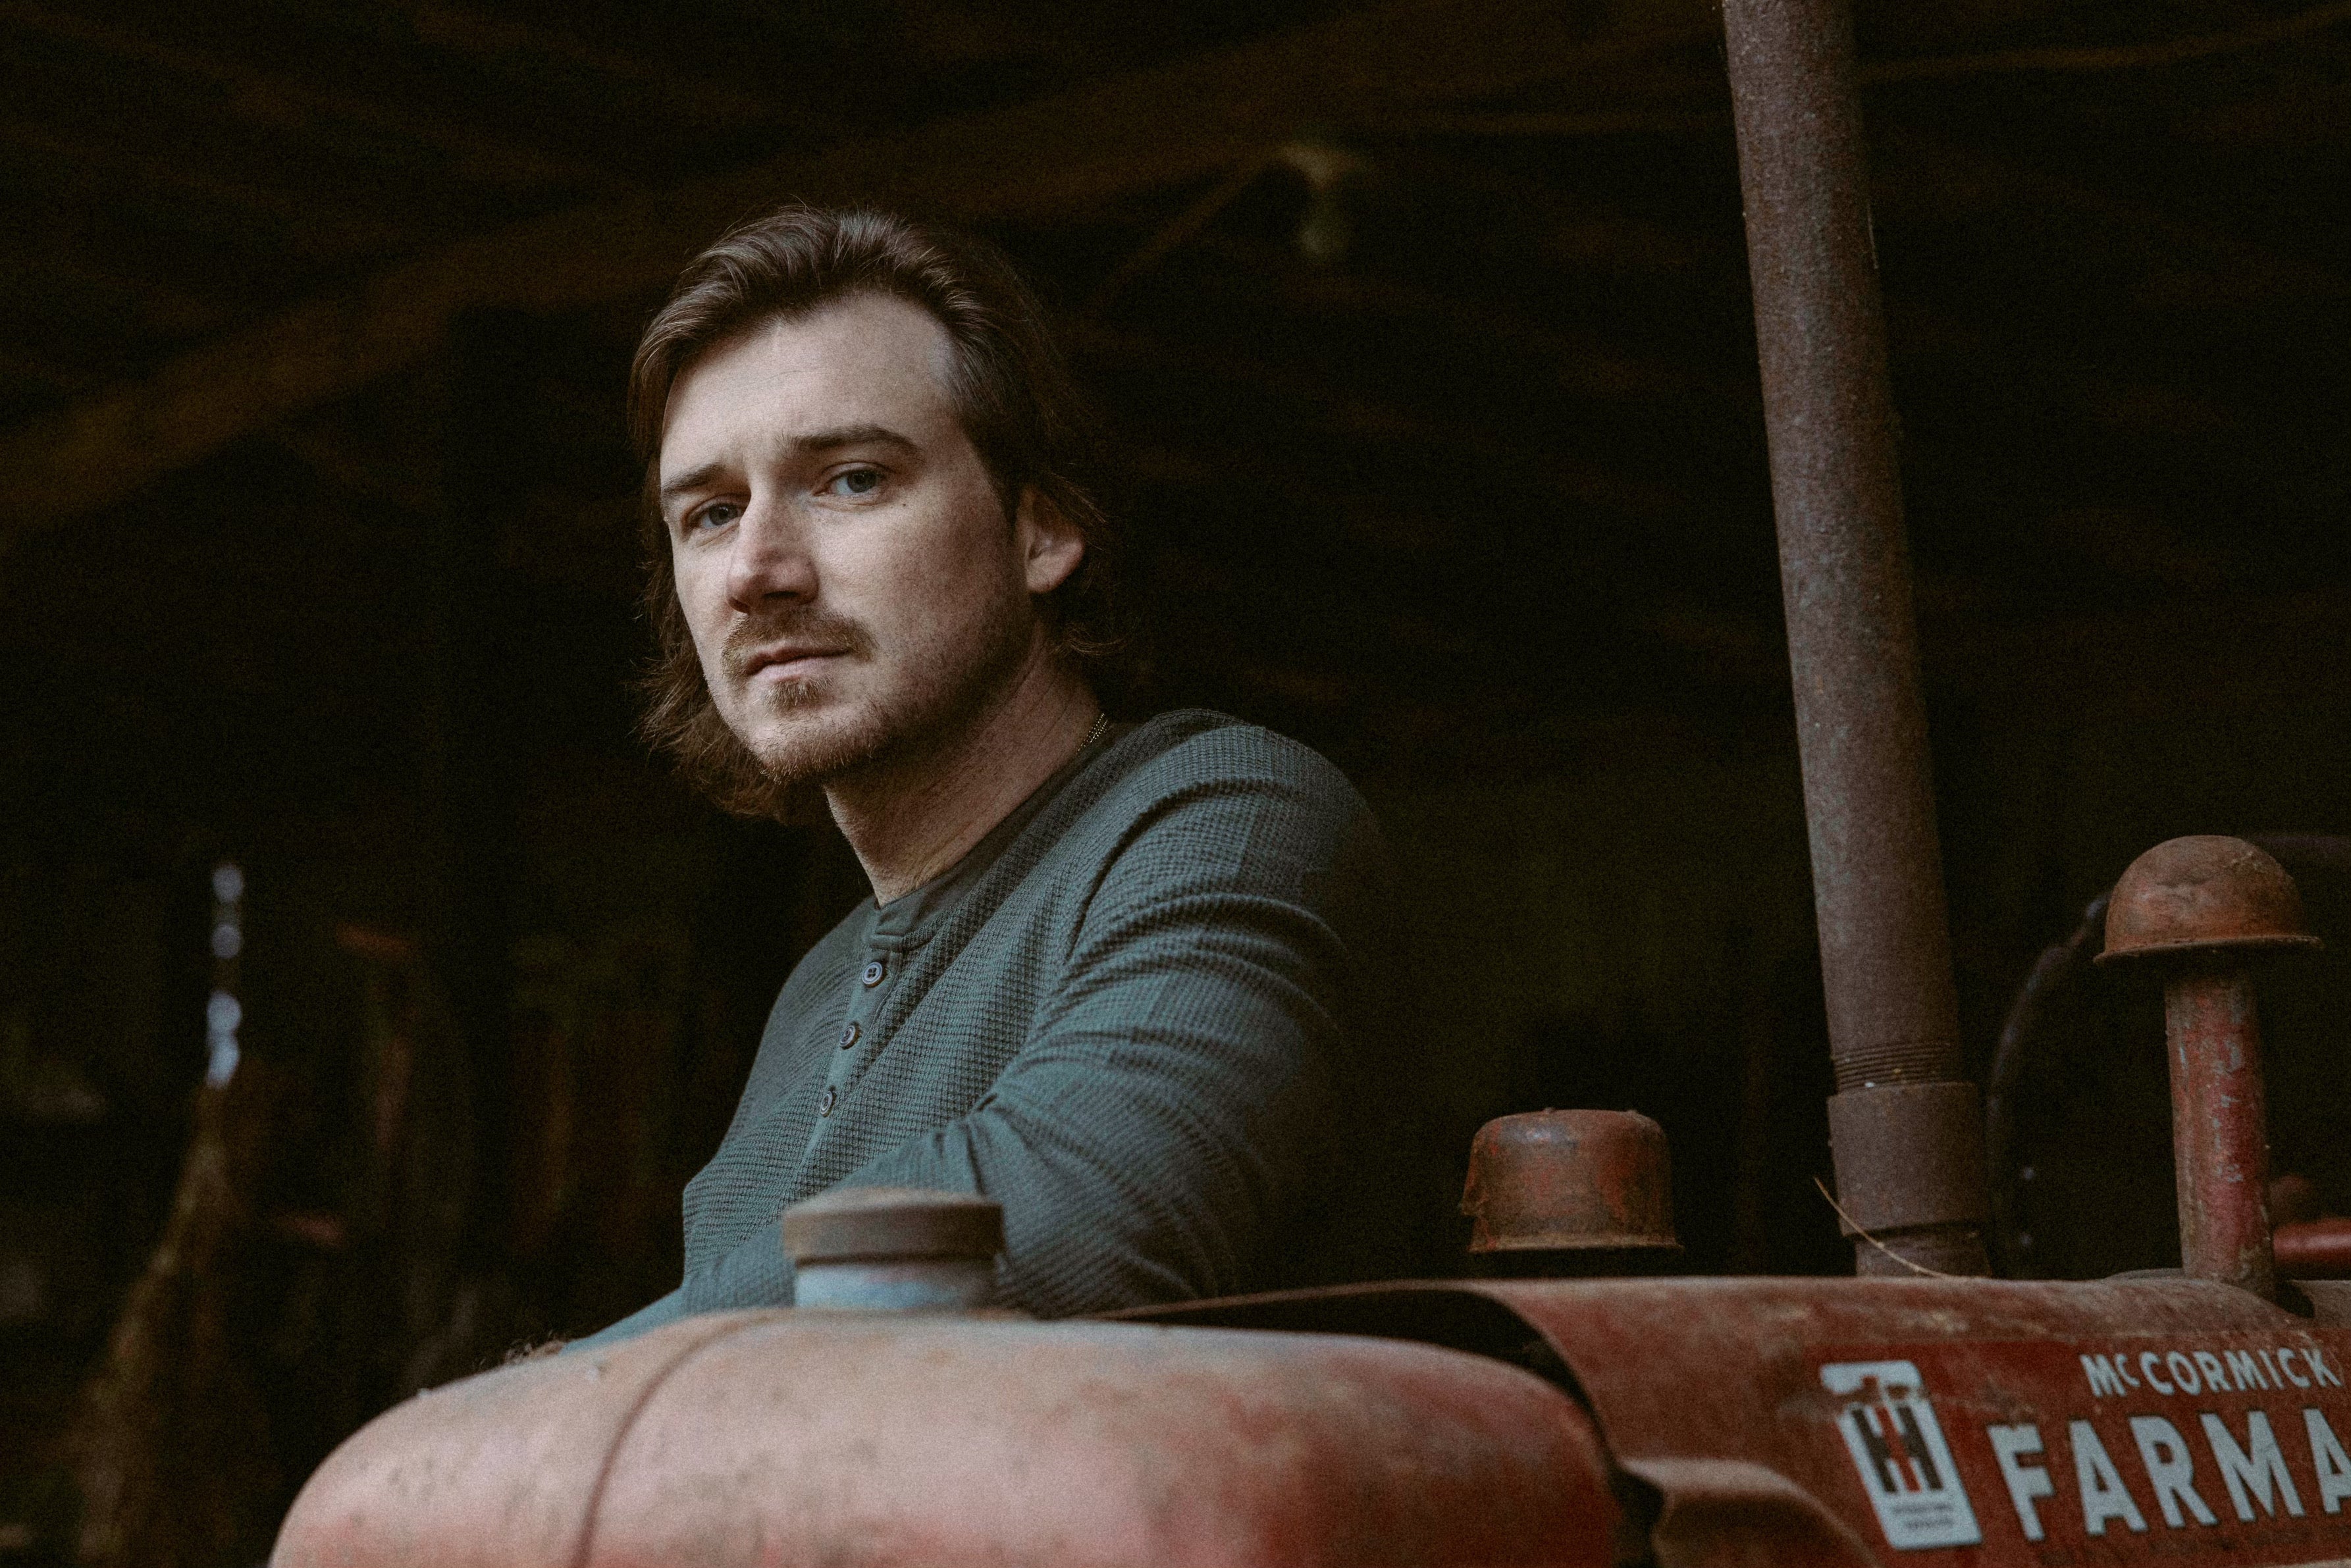 Morgan Wallen - One Night At a Time Tour in London promo photo for Artist presale offer code